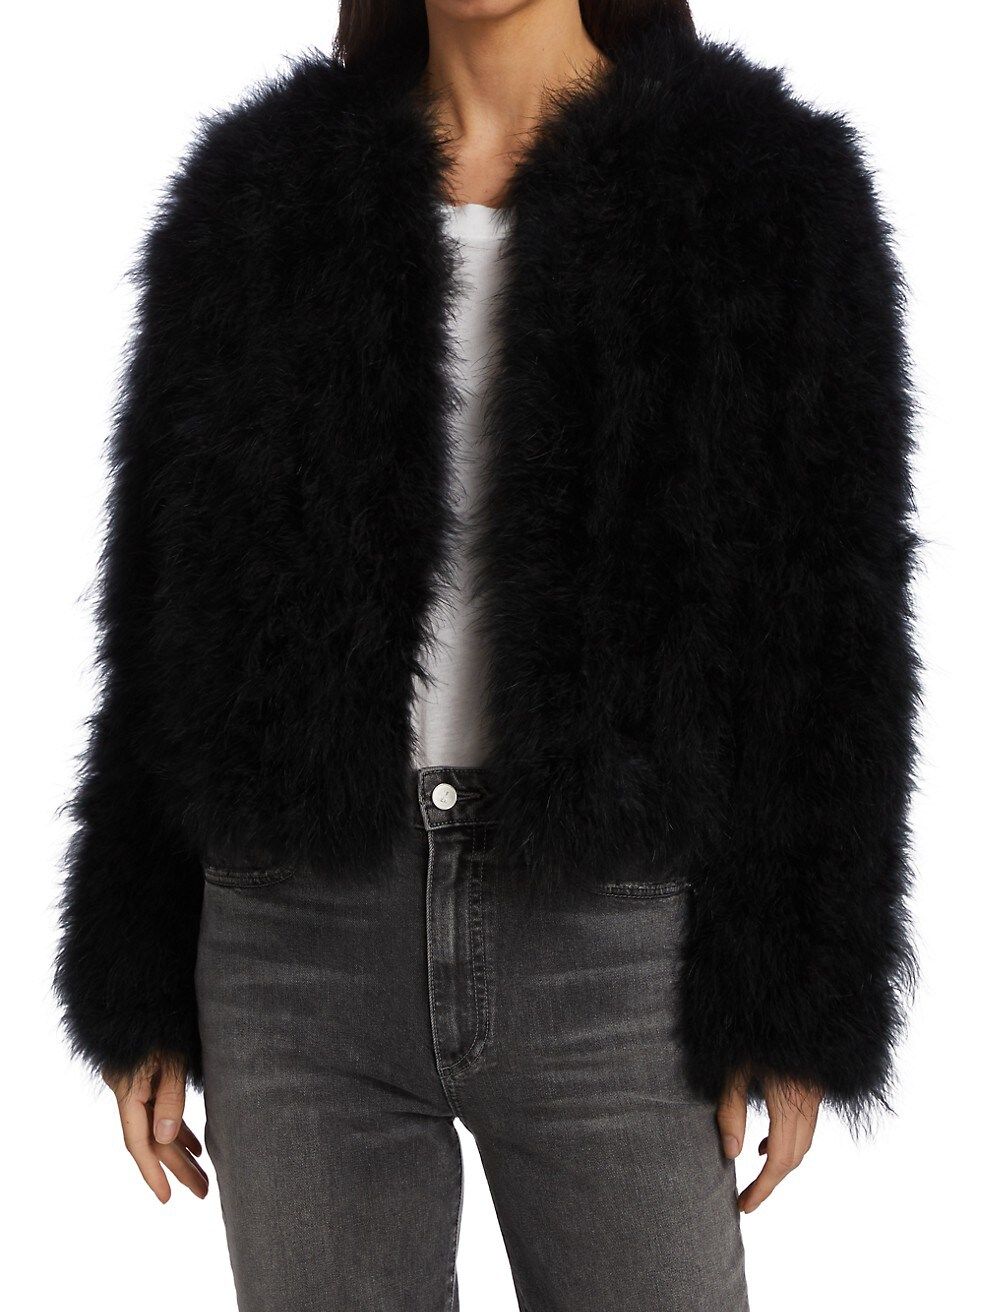 LAMARQUE Deora Feathered Jacket | Saks Fifth Avenue